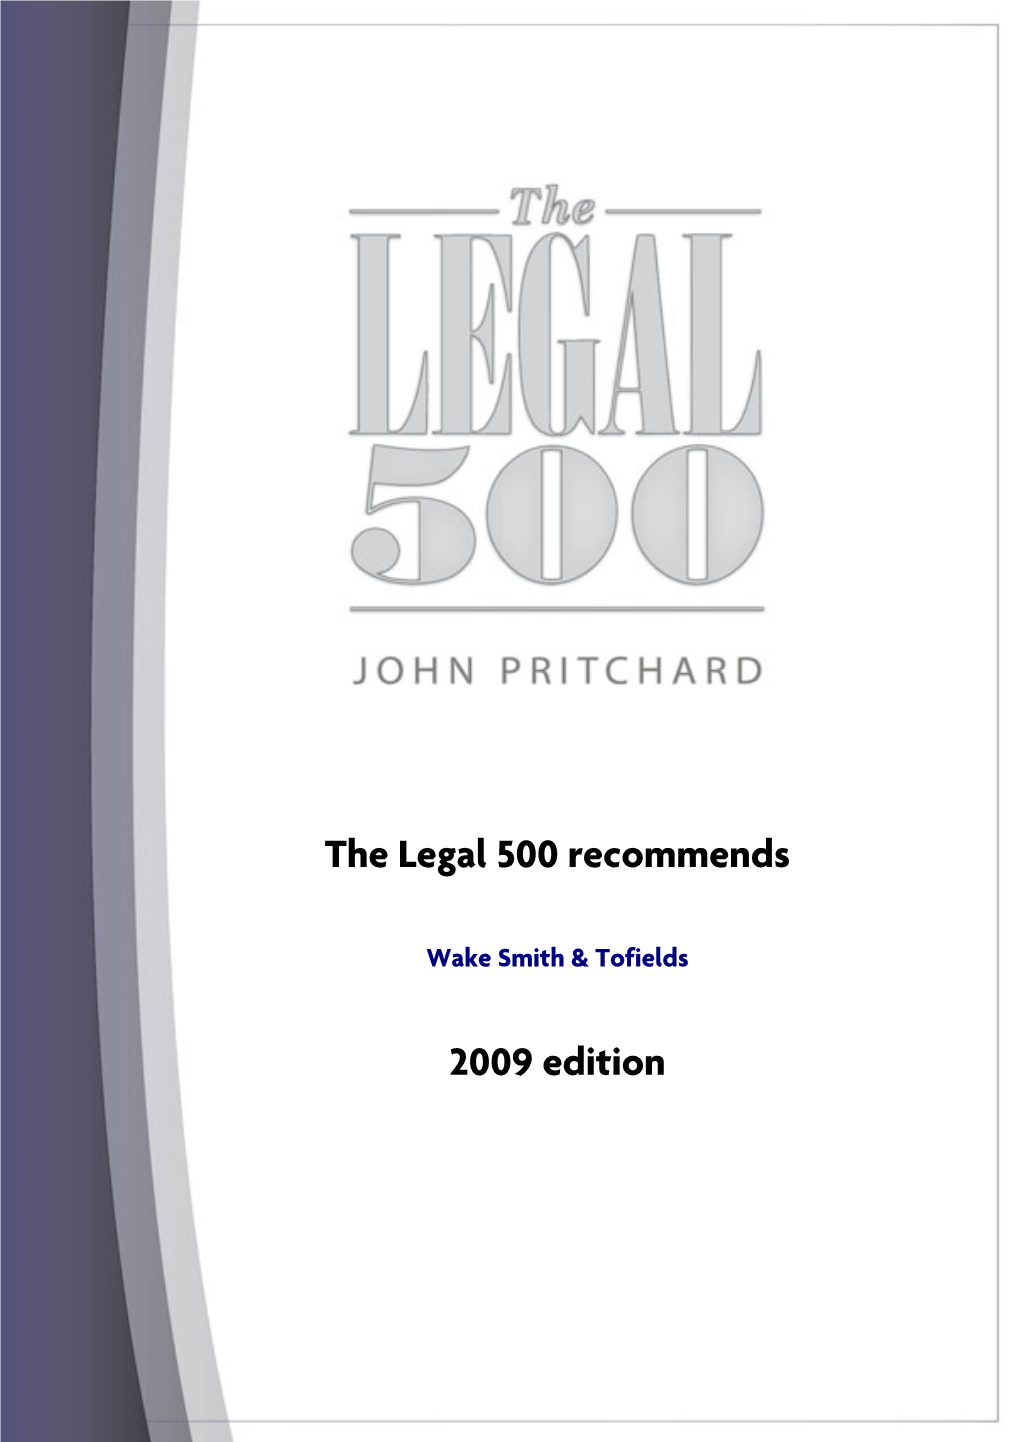 The Legal 500 Recommends 2009 Edition